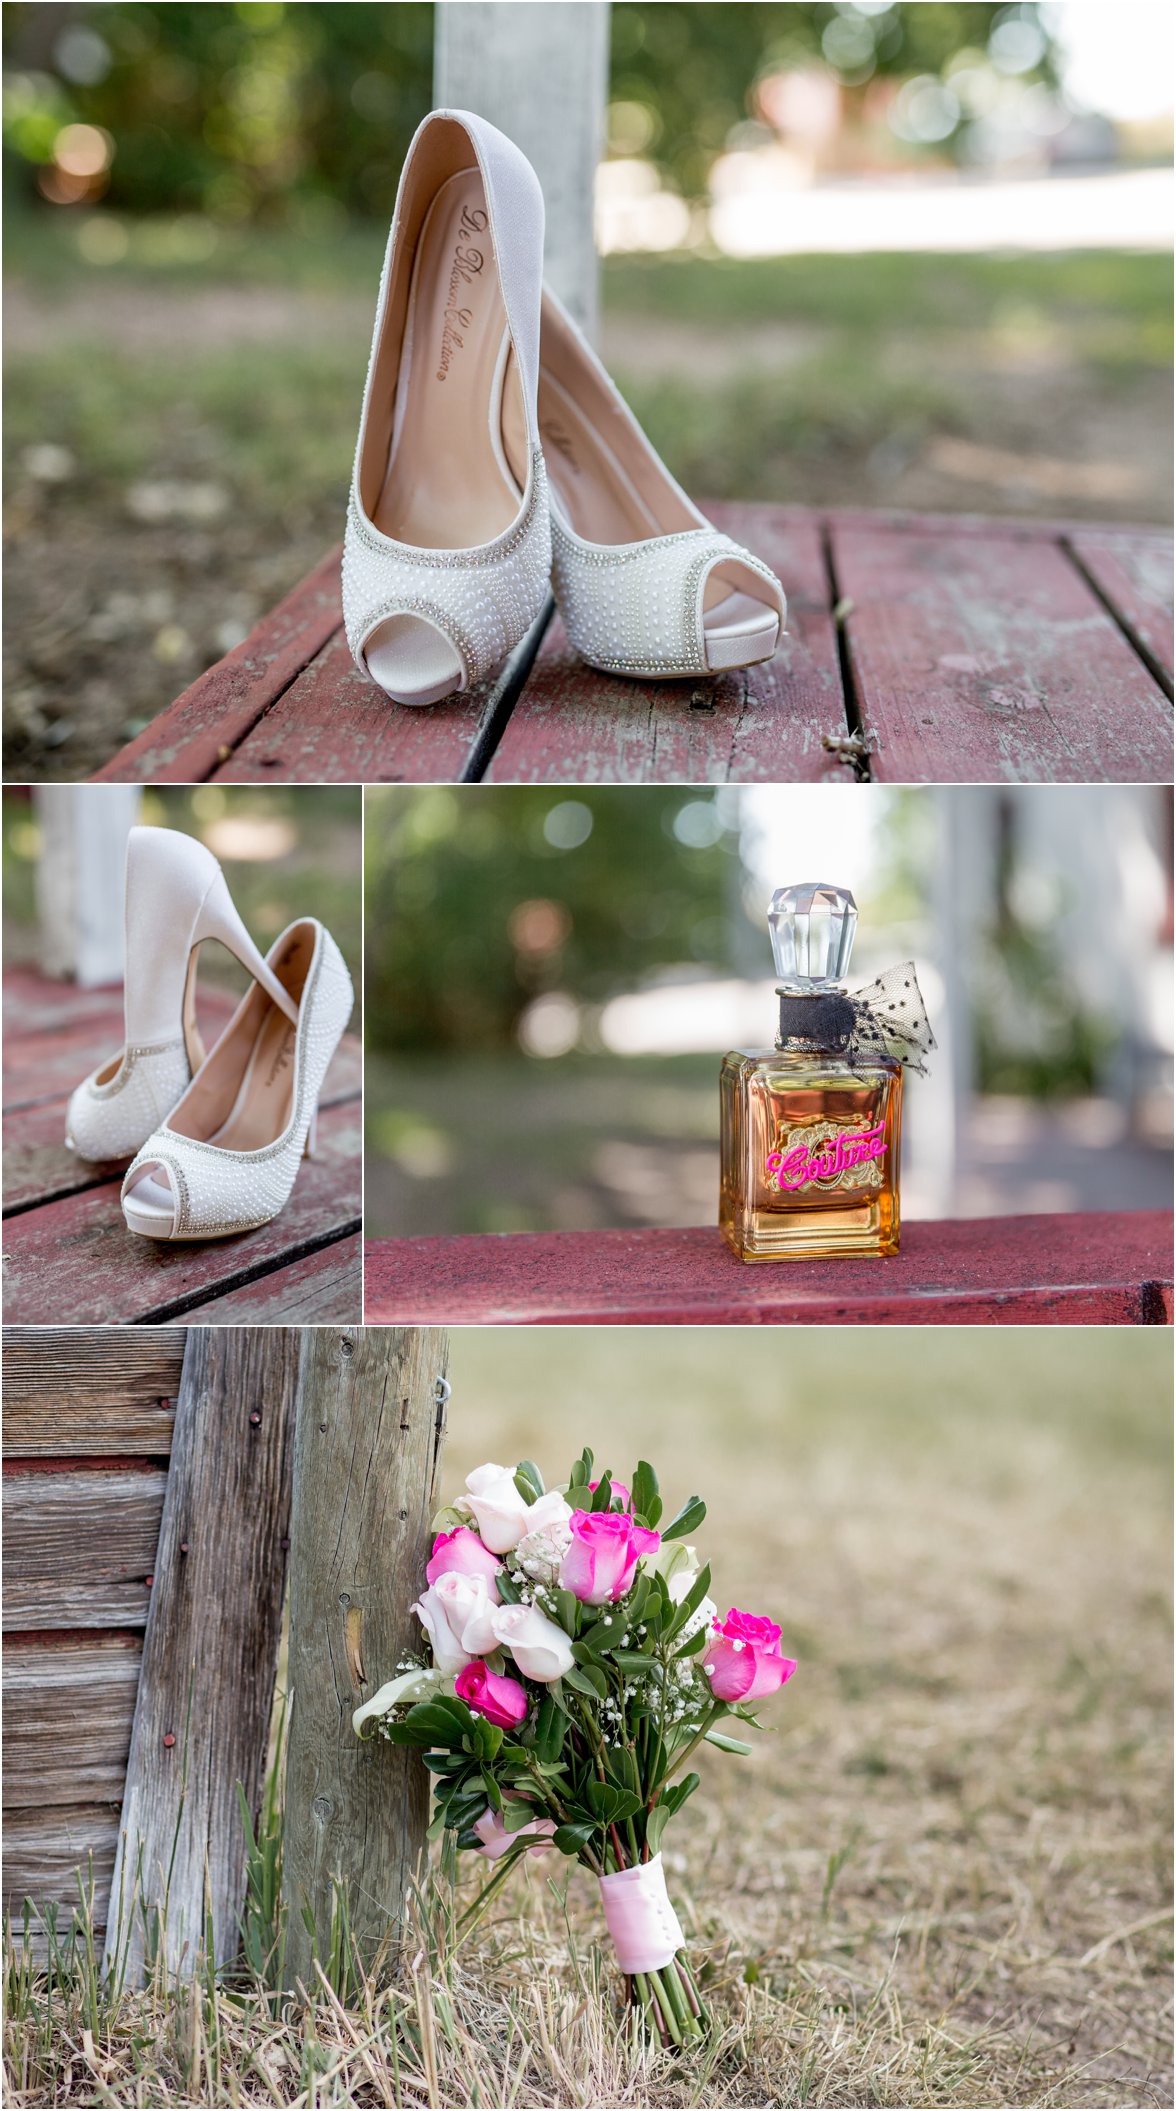 Cheyenne, Wyoming Wedding at Terry Bison Ranch by Greeley, Colorado Wedding Photographer